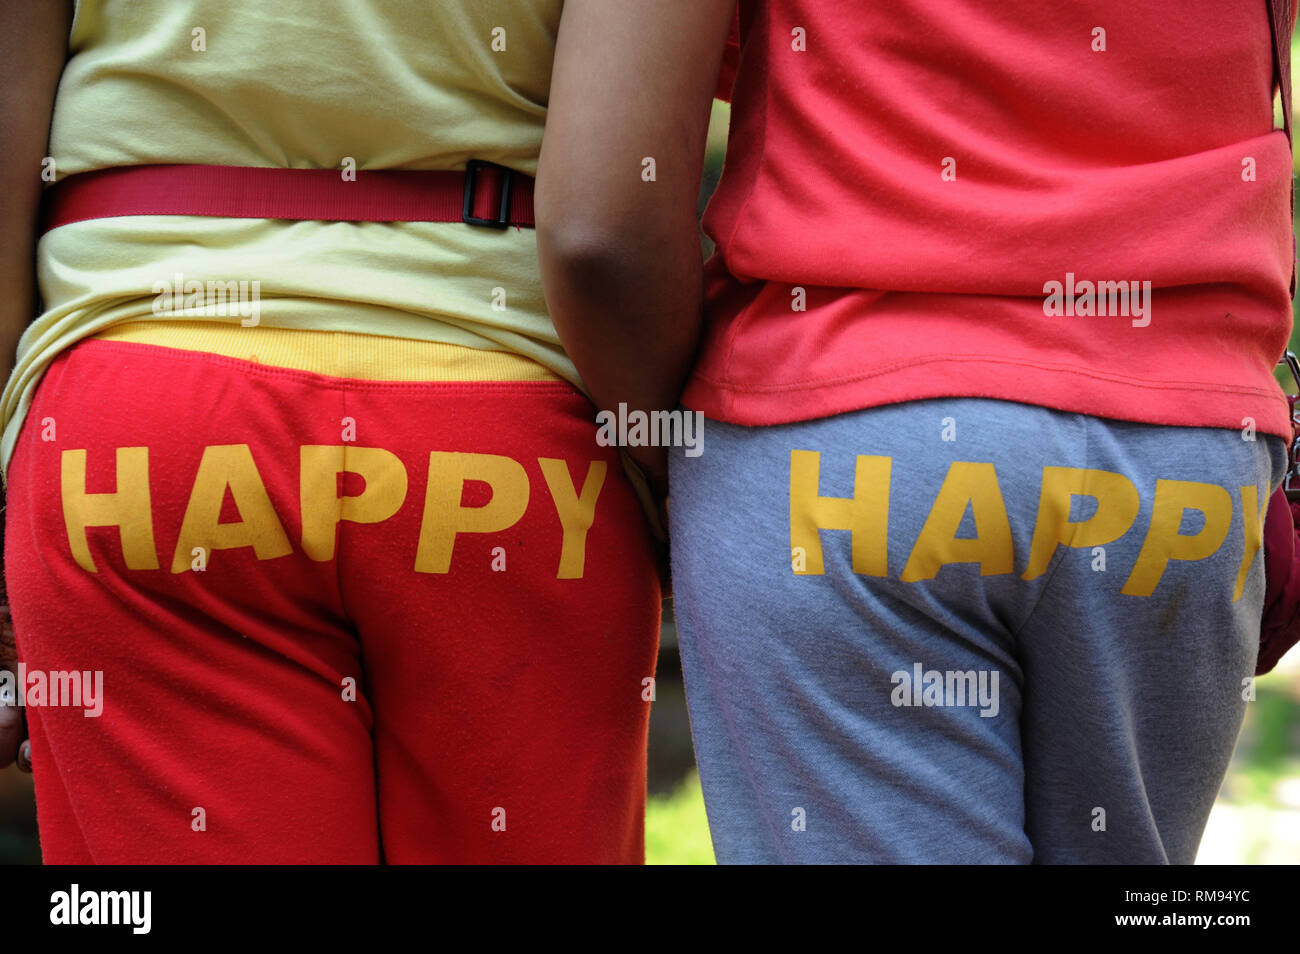 Happy printed on pants rear Stock Photo